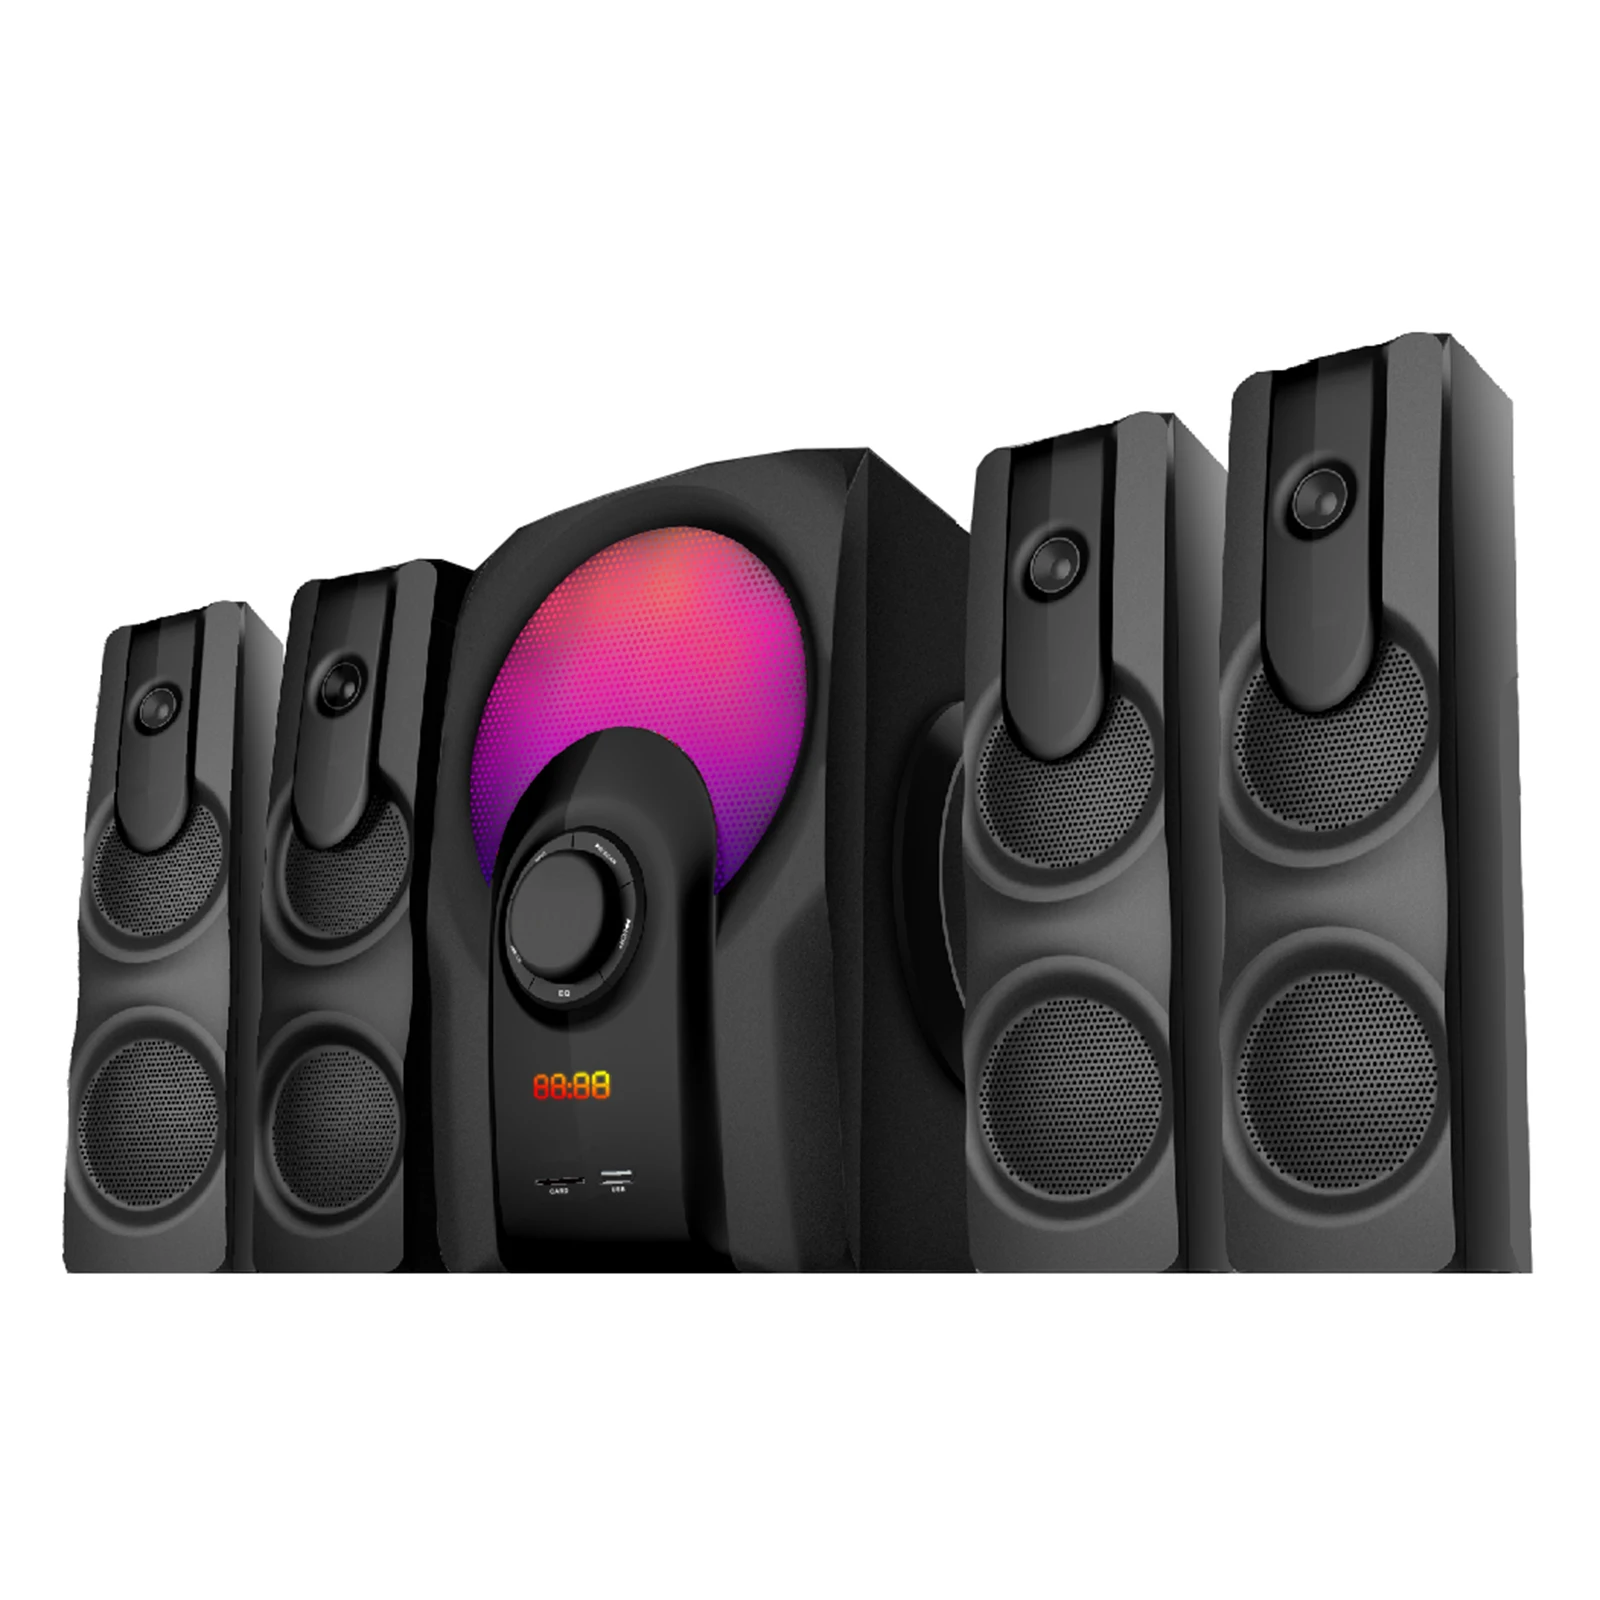 TK-821-3.1 Top Quality home theater system Surround sound BT subwoofer multimedia speaker